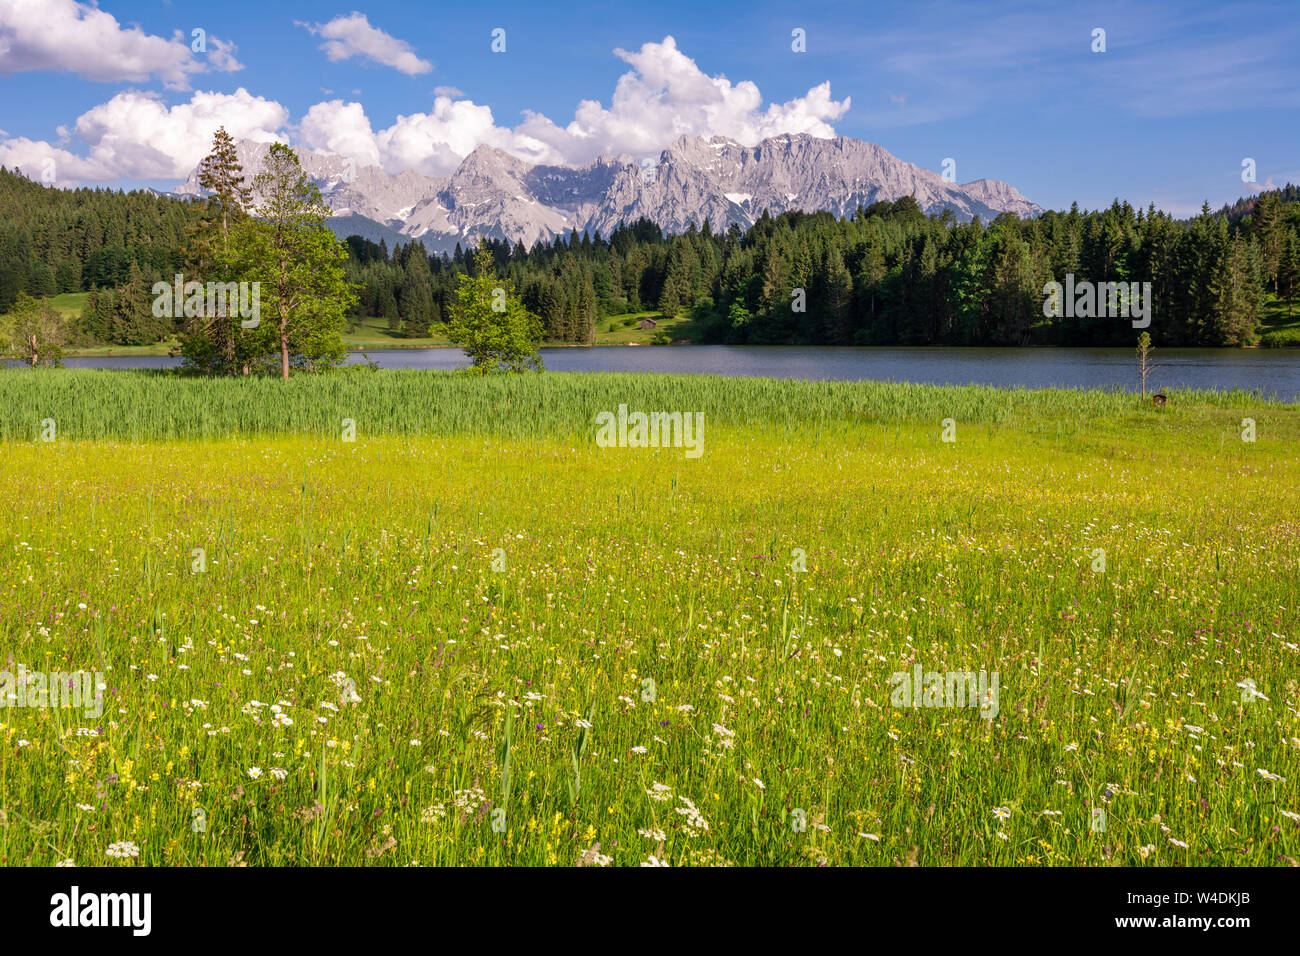 The idyllic lake Geroldsee in the Karwendel Mountains of the Bavarian alps. Stock Photo